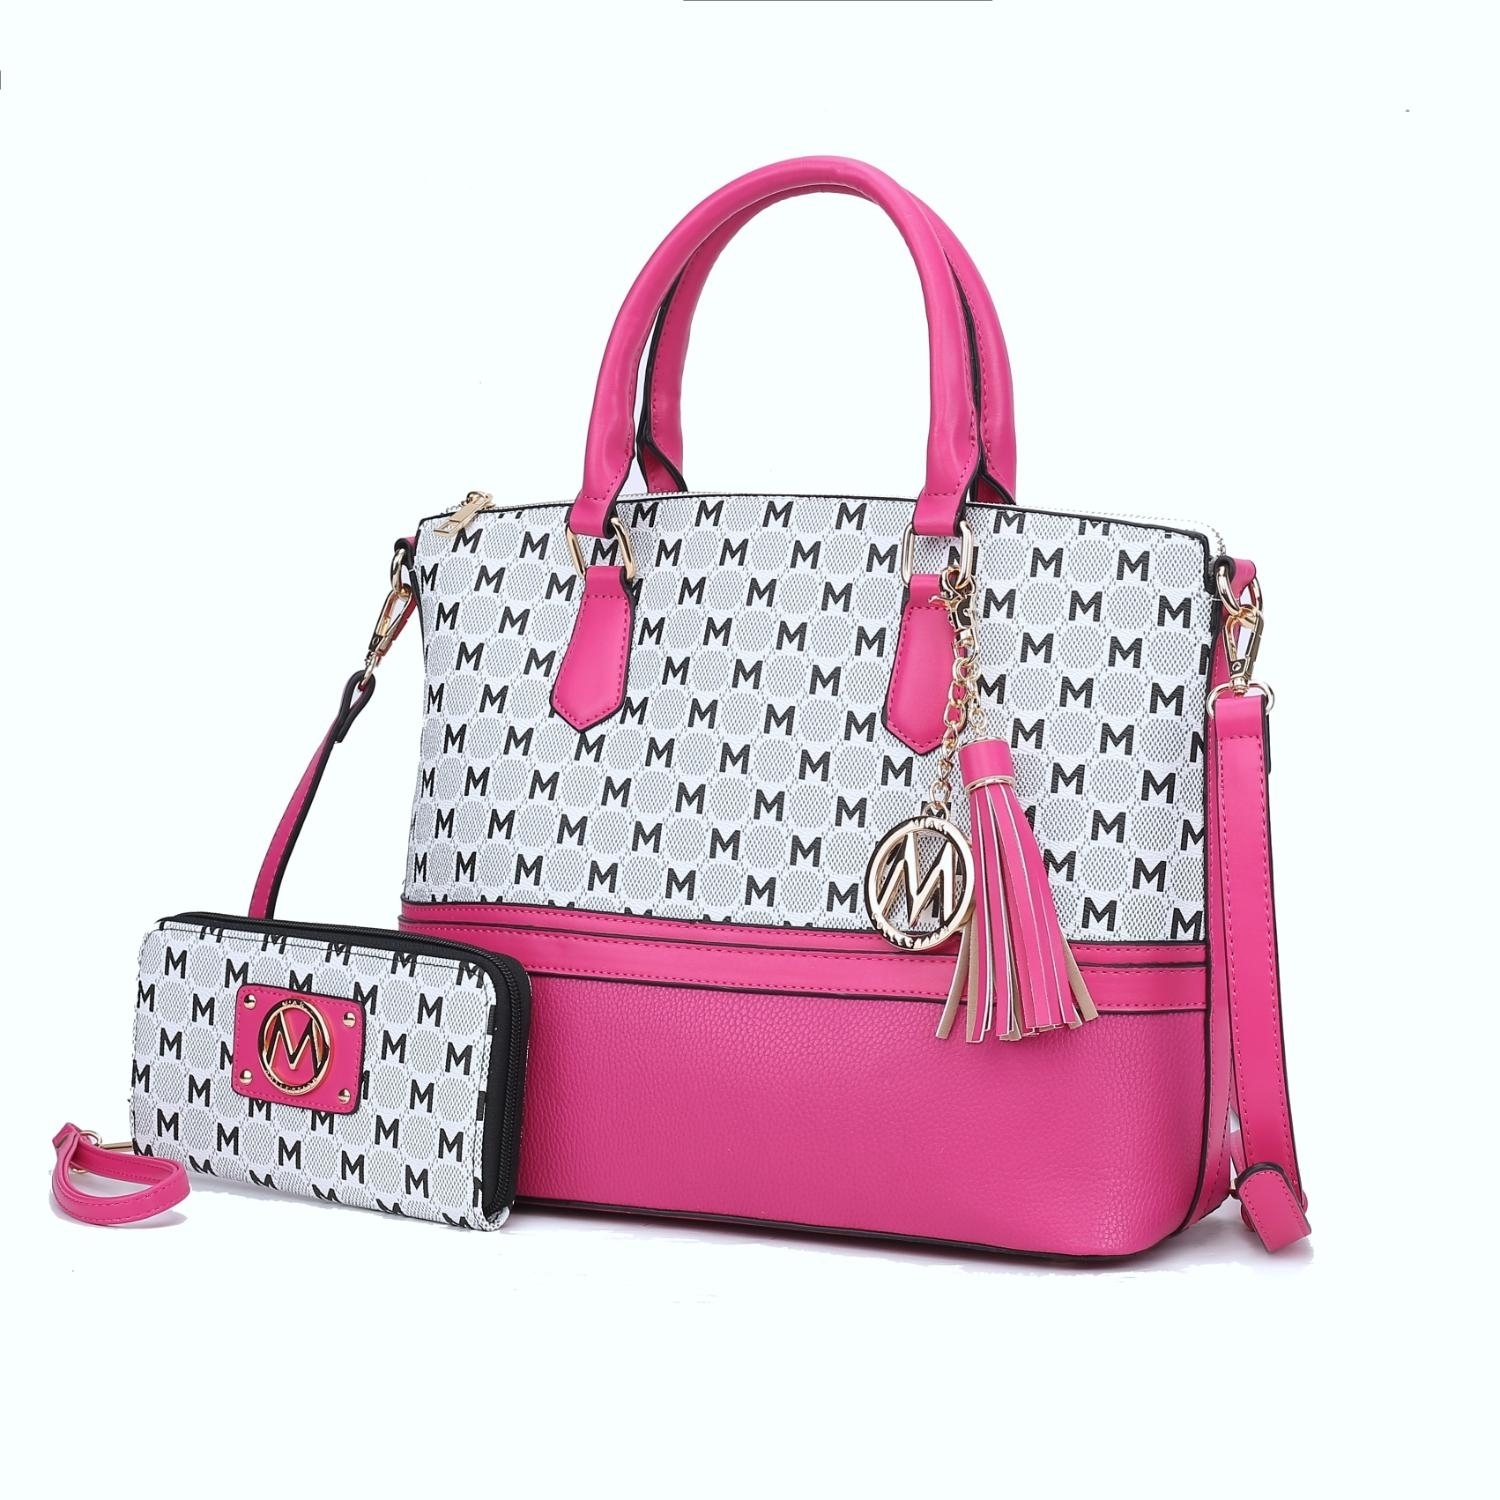 MKF Collection Saylor Circular M Emblem Print Women's Tote Bag With Matching Wristlet Wallet 2 Pieces By Mia K - Fuchsia